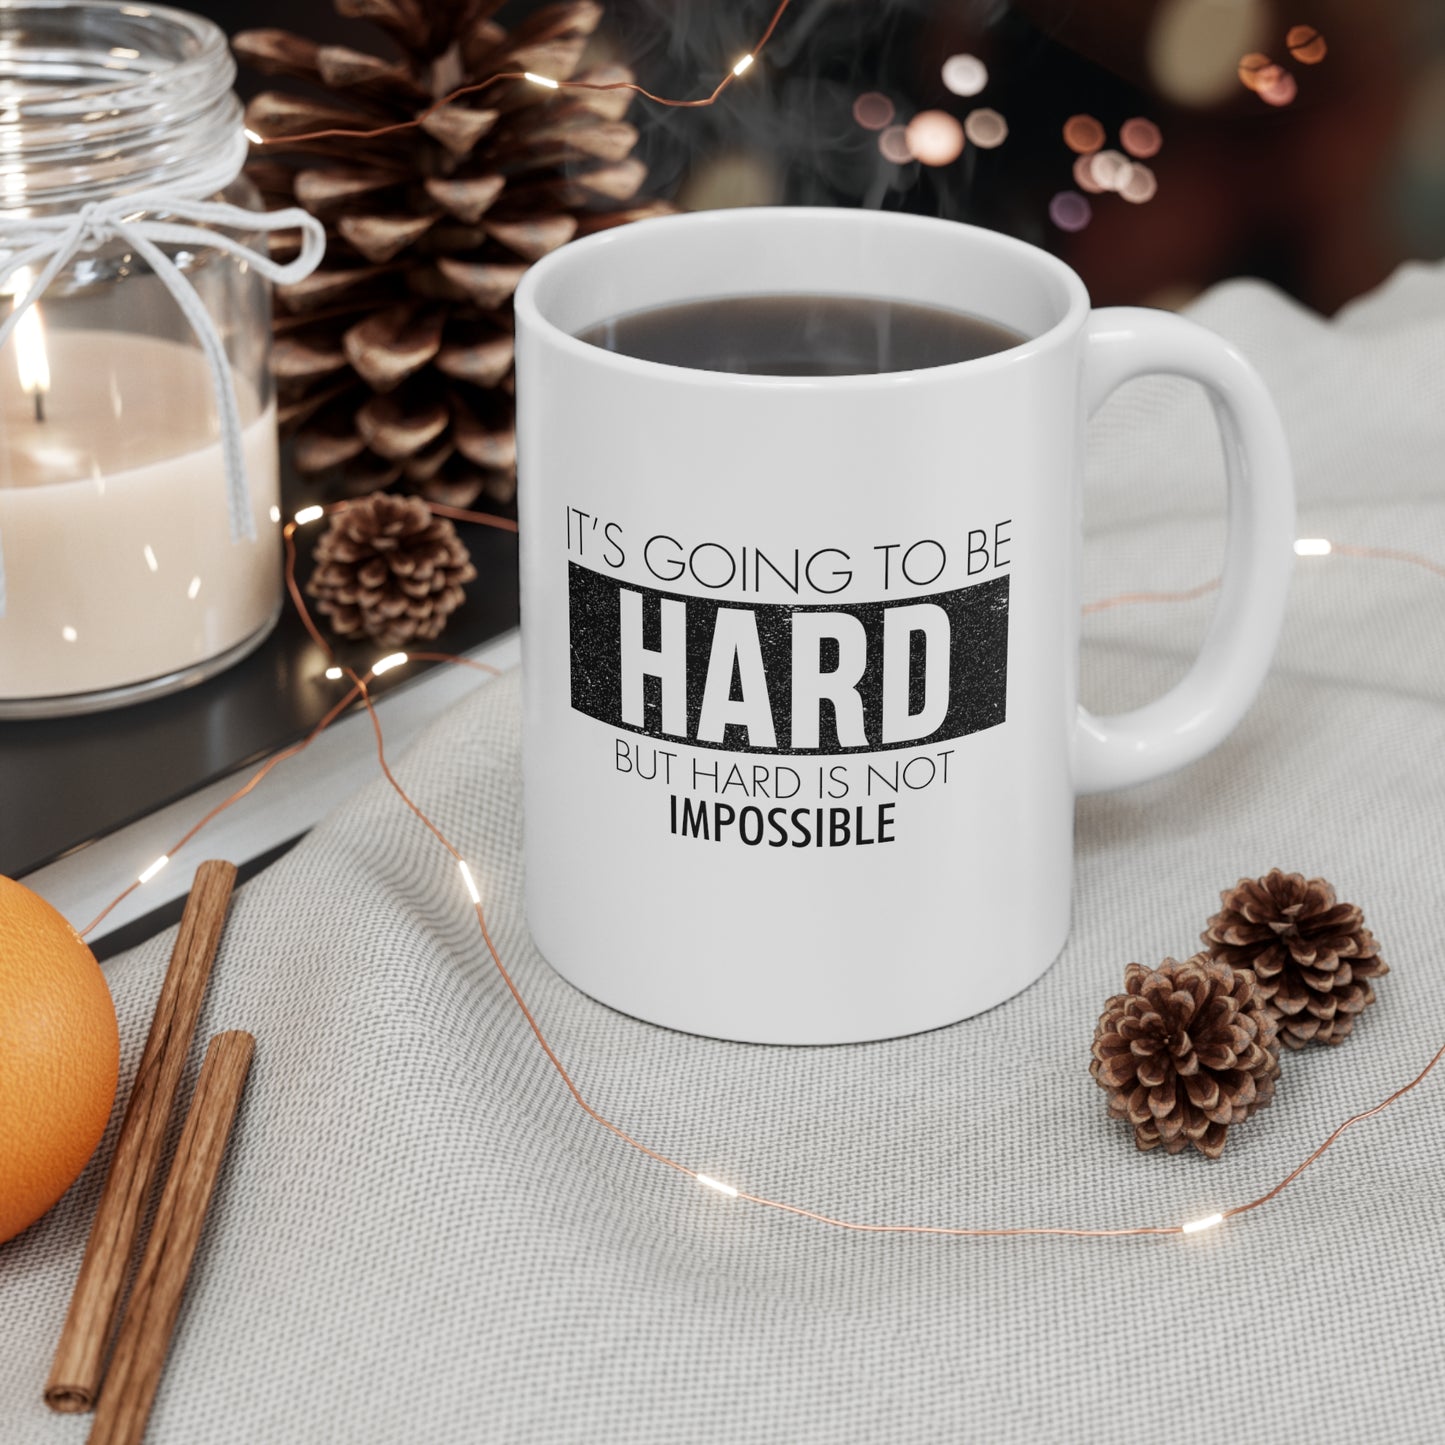 Motivational Ceramic Mug 11oz to Give A Push When Needed